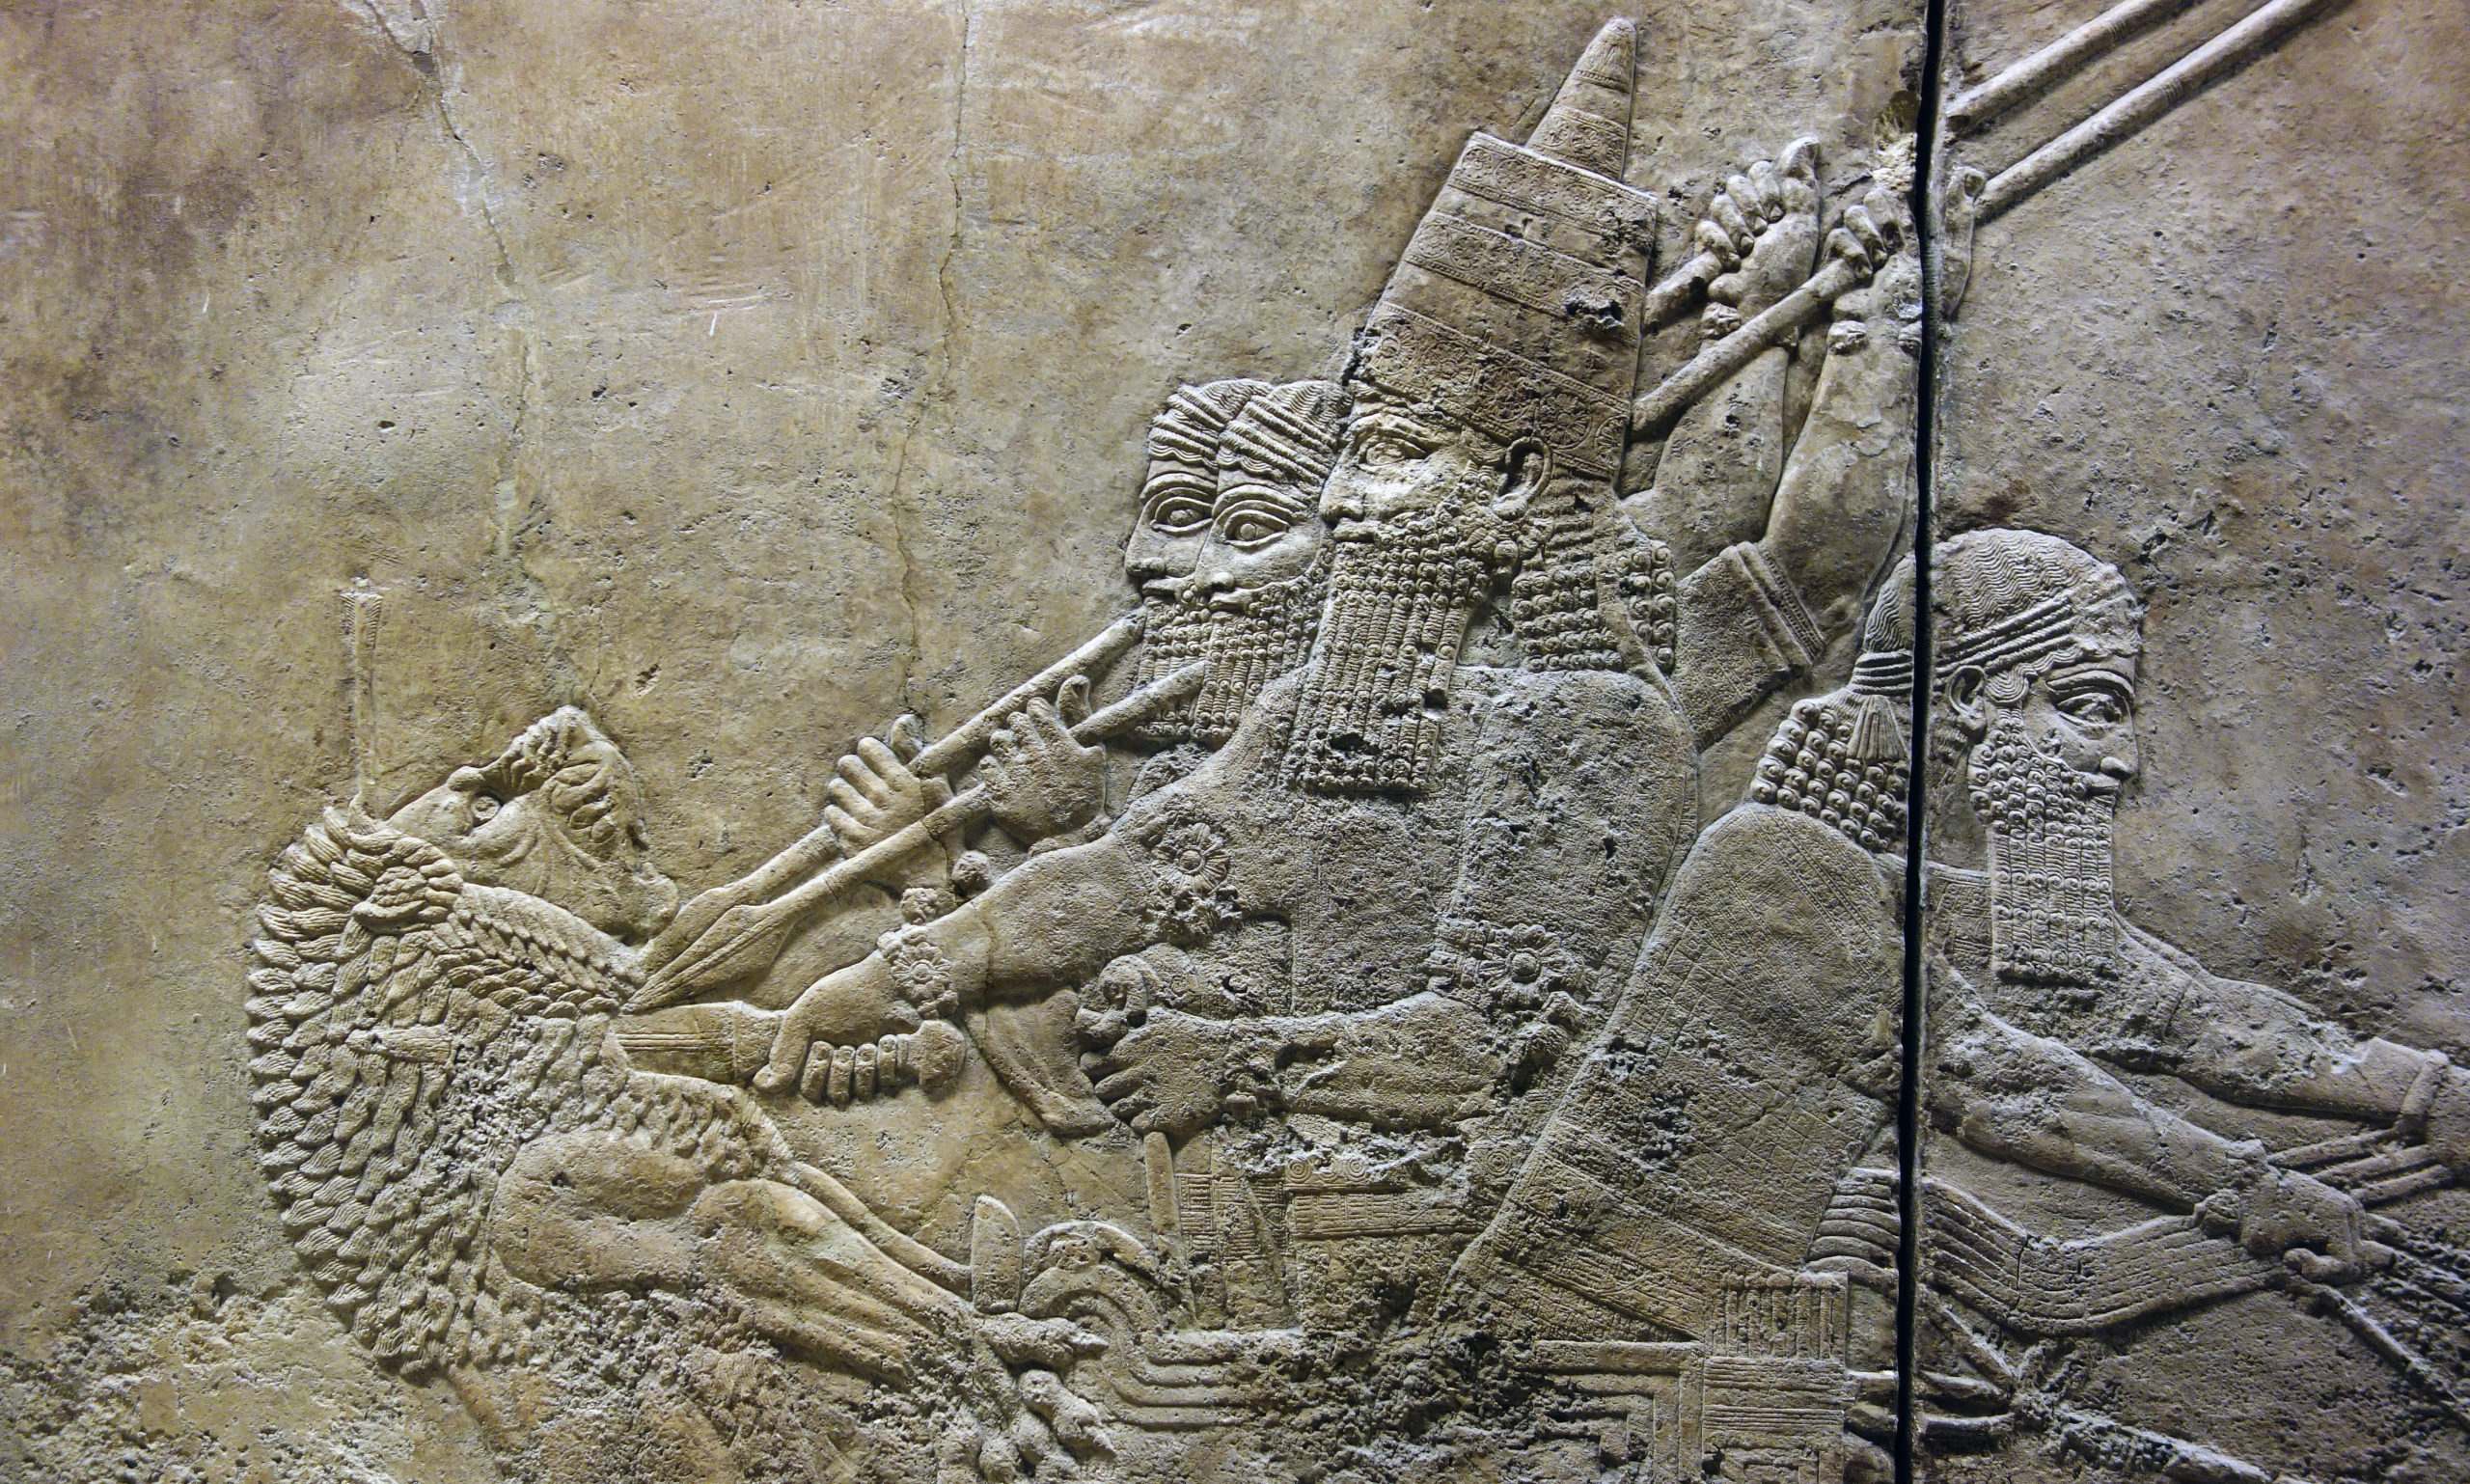 Ashurbanipal slitting the throat of a lion from his chariot (detail), Ashurbanipal Hunting Lions, gypsum hall relief from the North Palace, Ninevah, c. 645–635 B.C.E., excavated by H. Rassam beginning in 1853 (British Museum) (photo: Steven Zucker, CC BY-NC-SA 2.0)